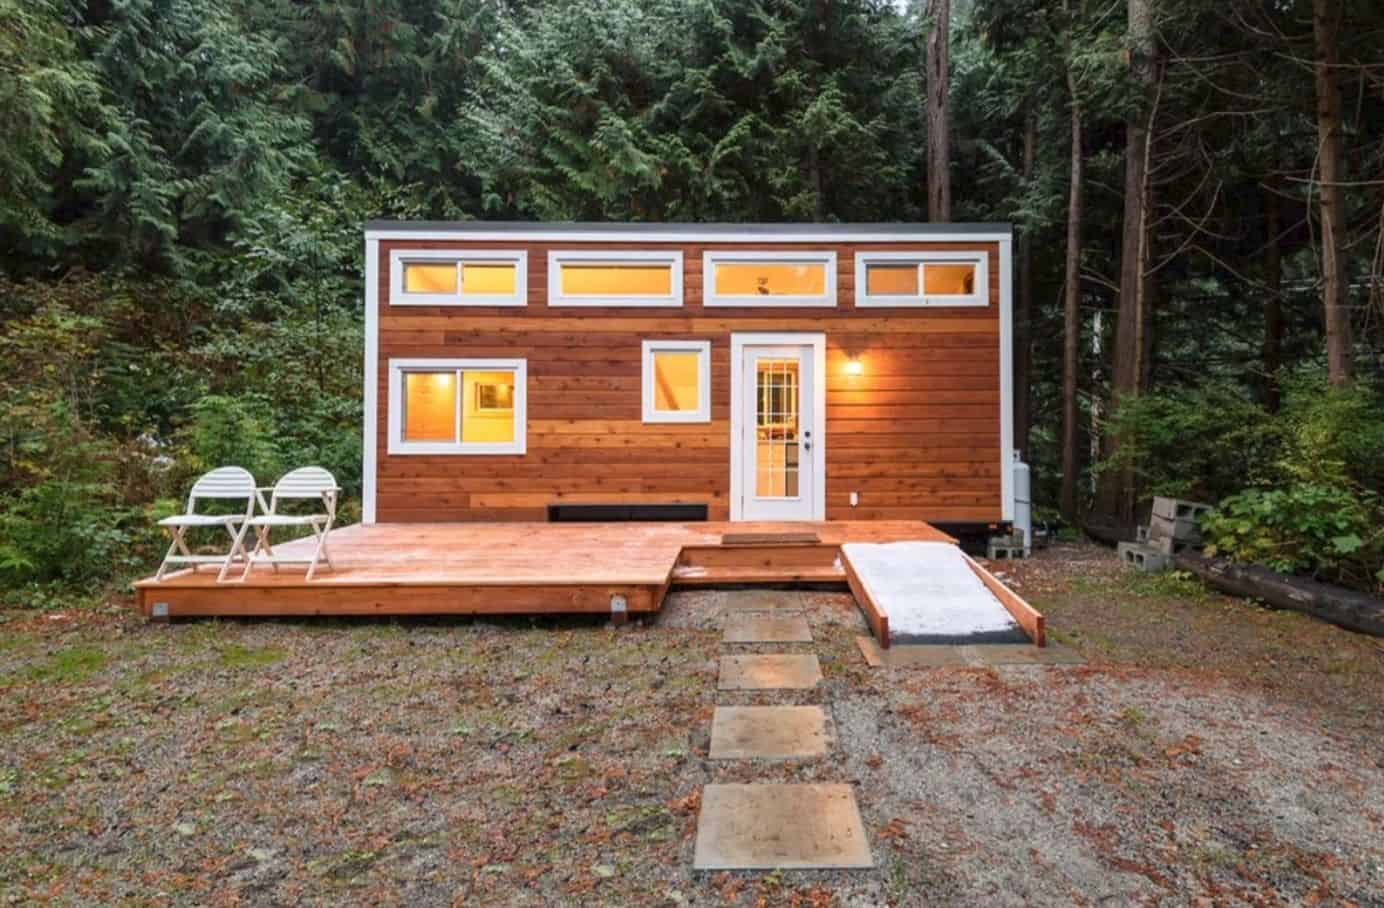 A picture of the tiny house in the Forest